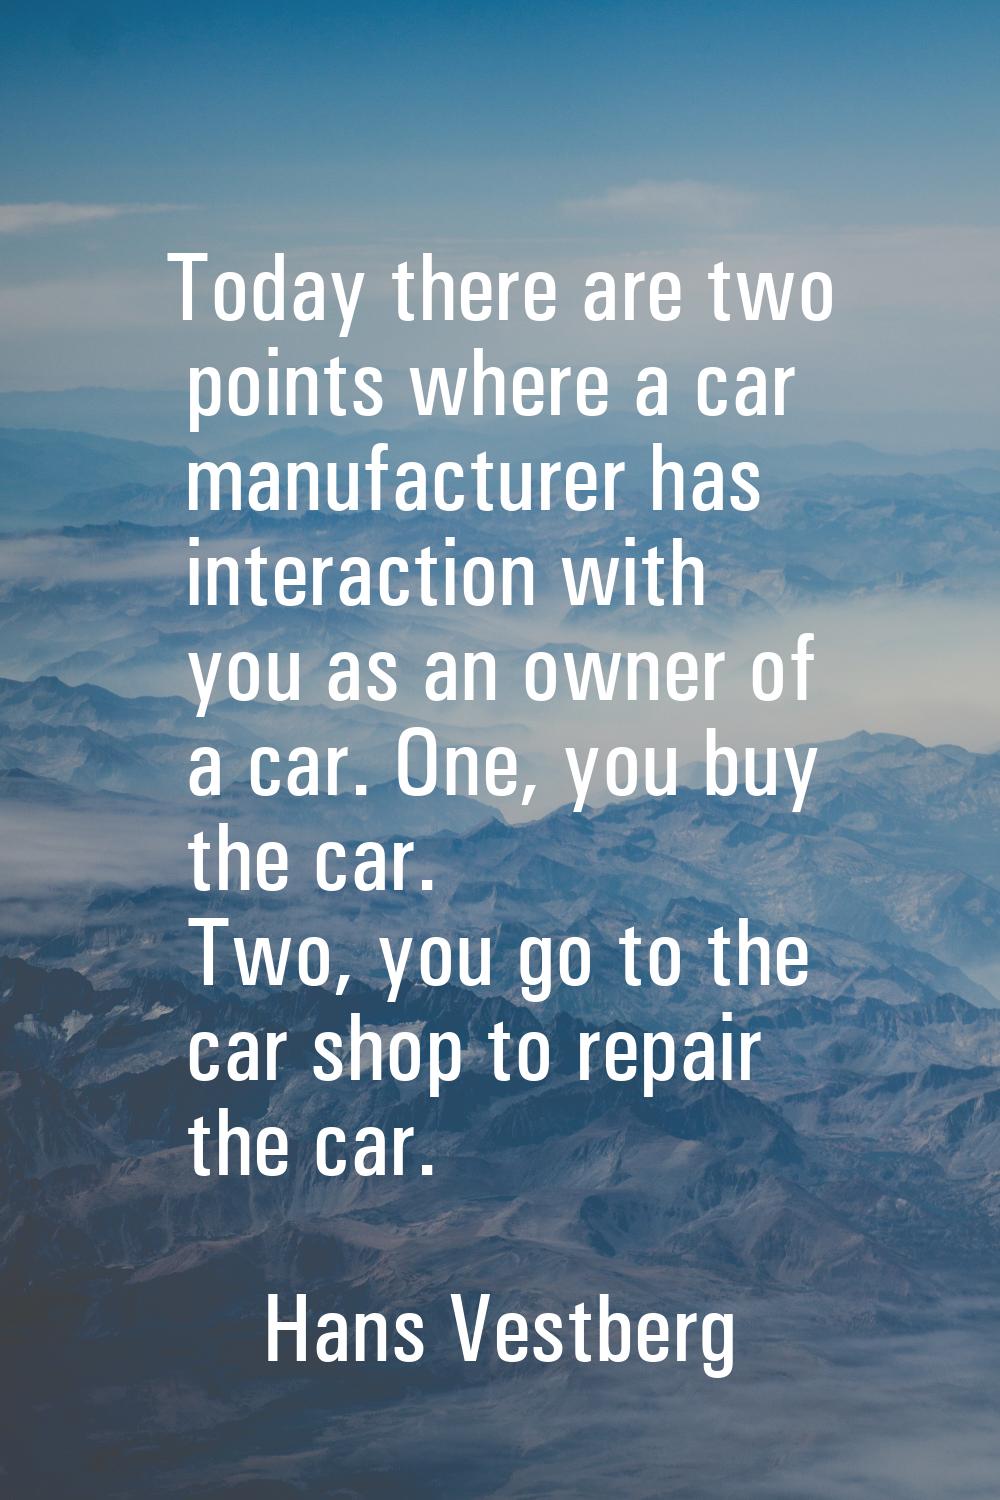 Today there are two points where a car manufacturer has interaction with you as an owner of a car. 